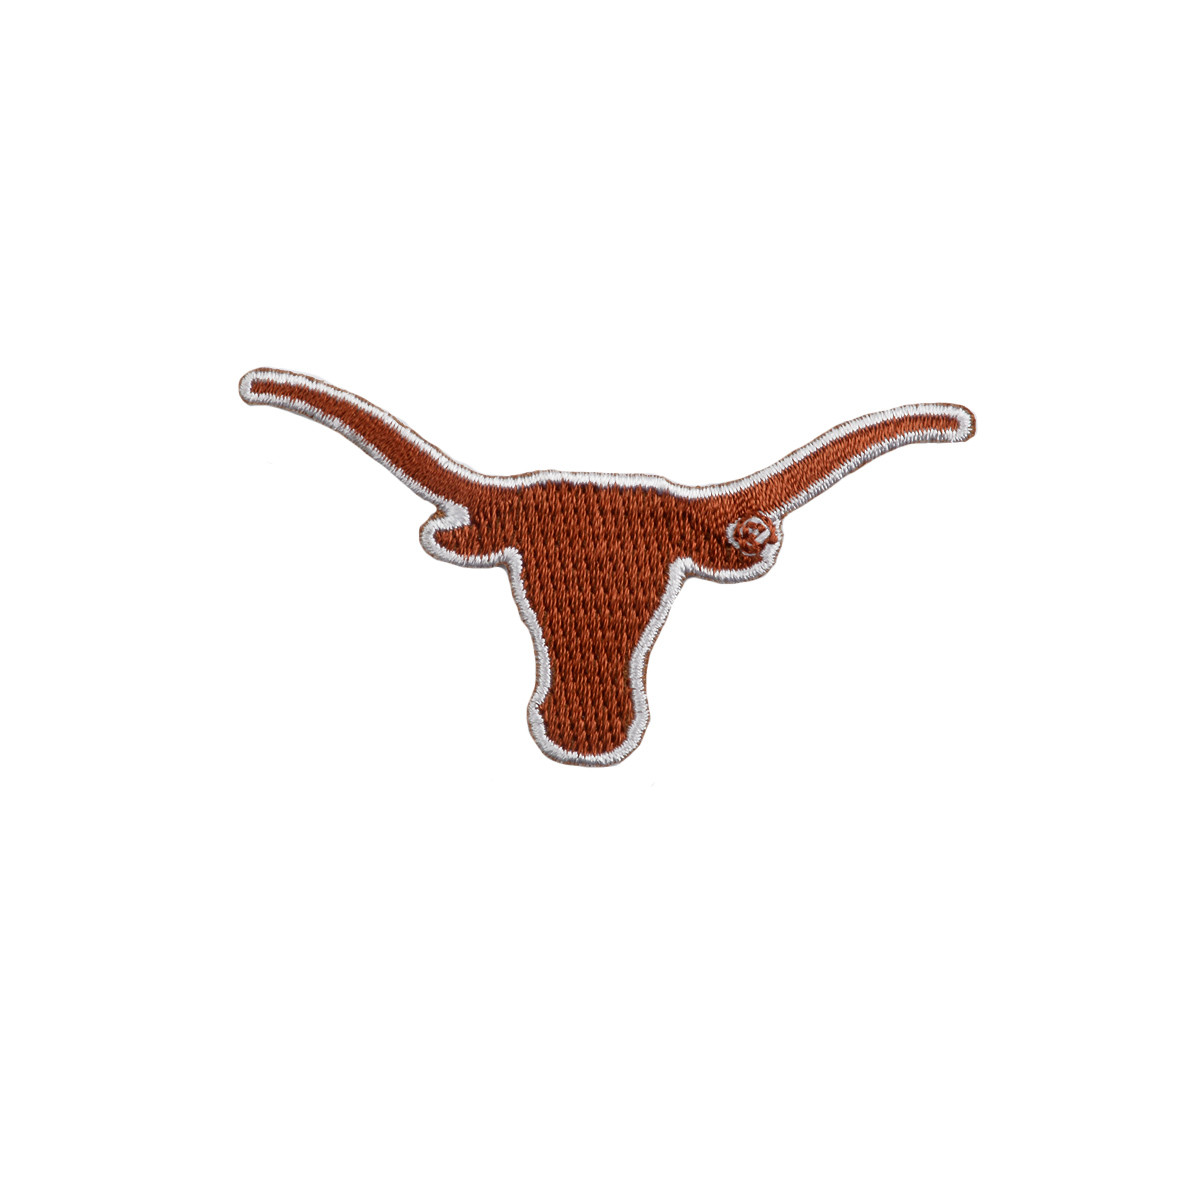 Texas Longhorns vintage iron on embroidered patch 3.5" x 2.5” 